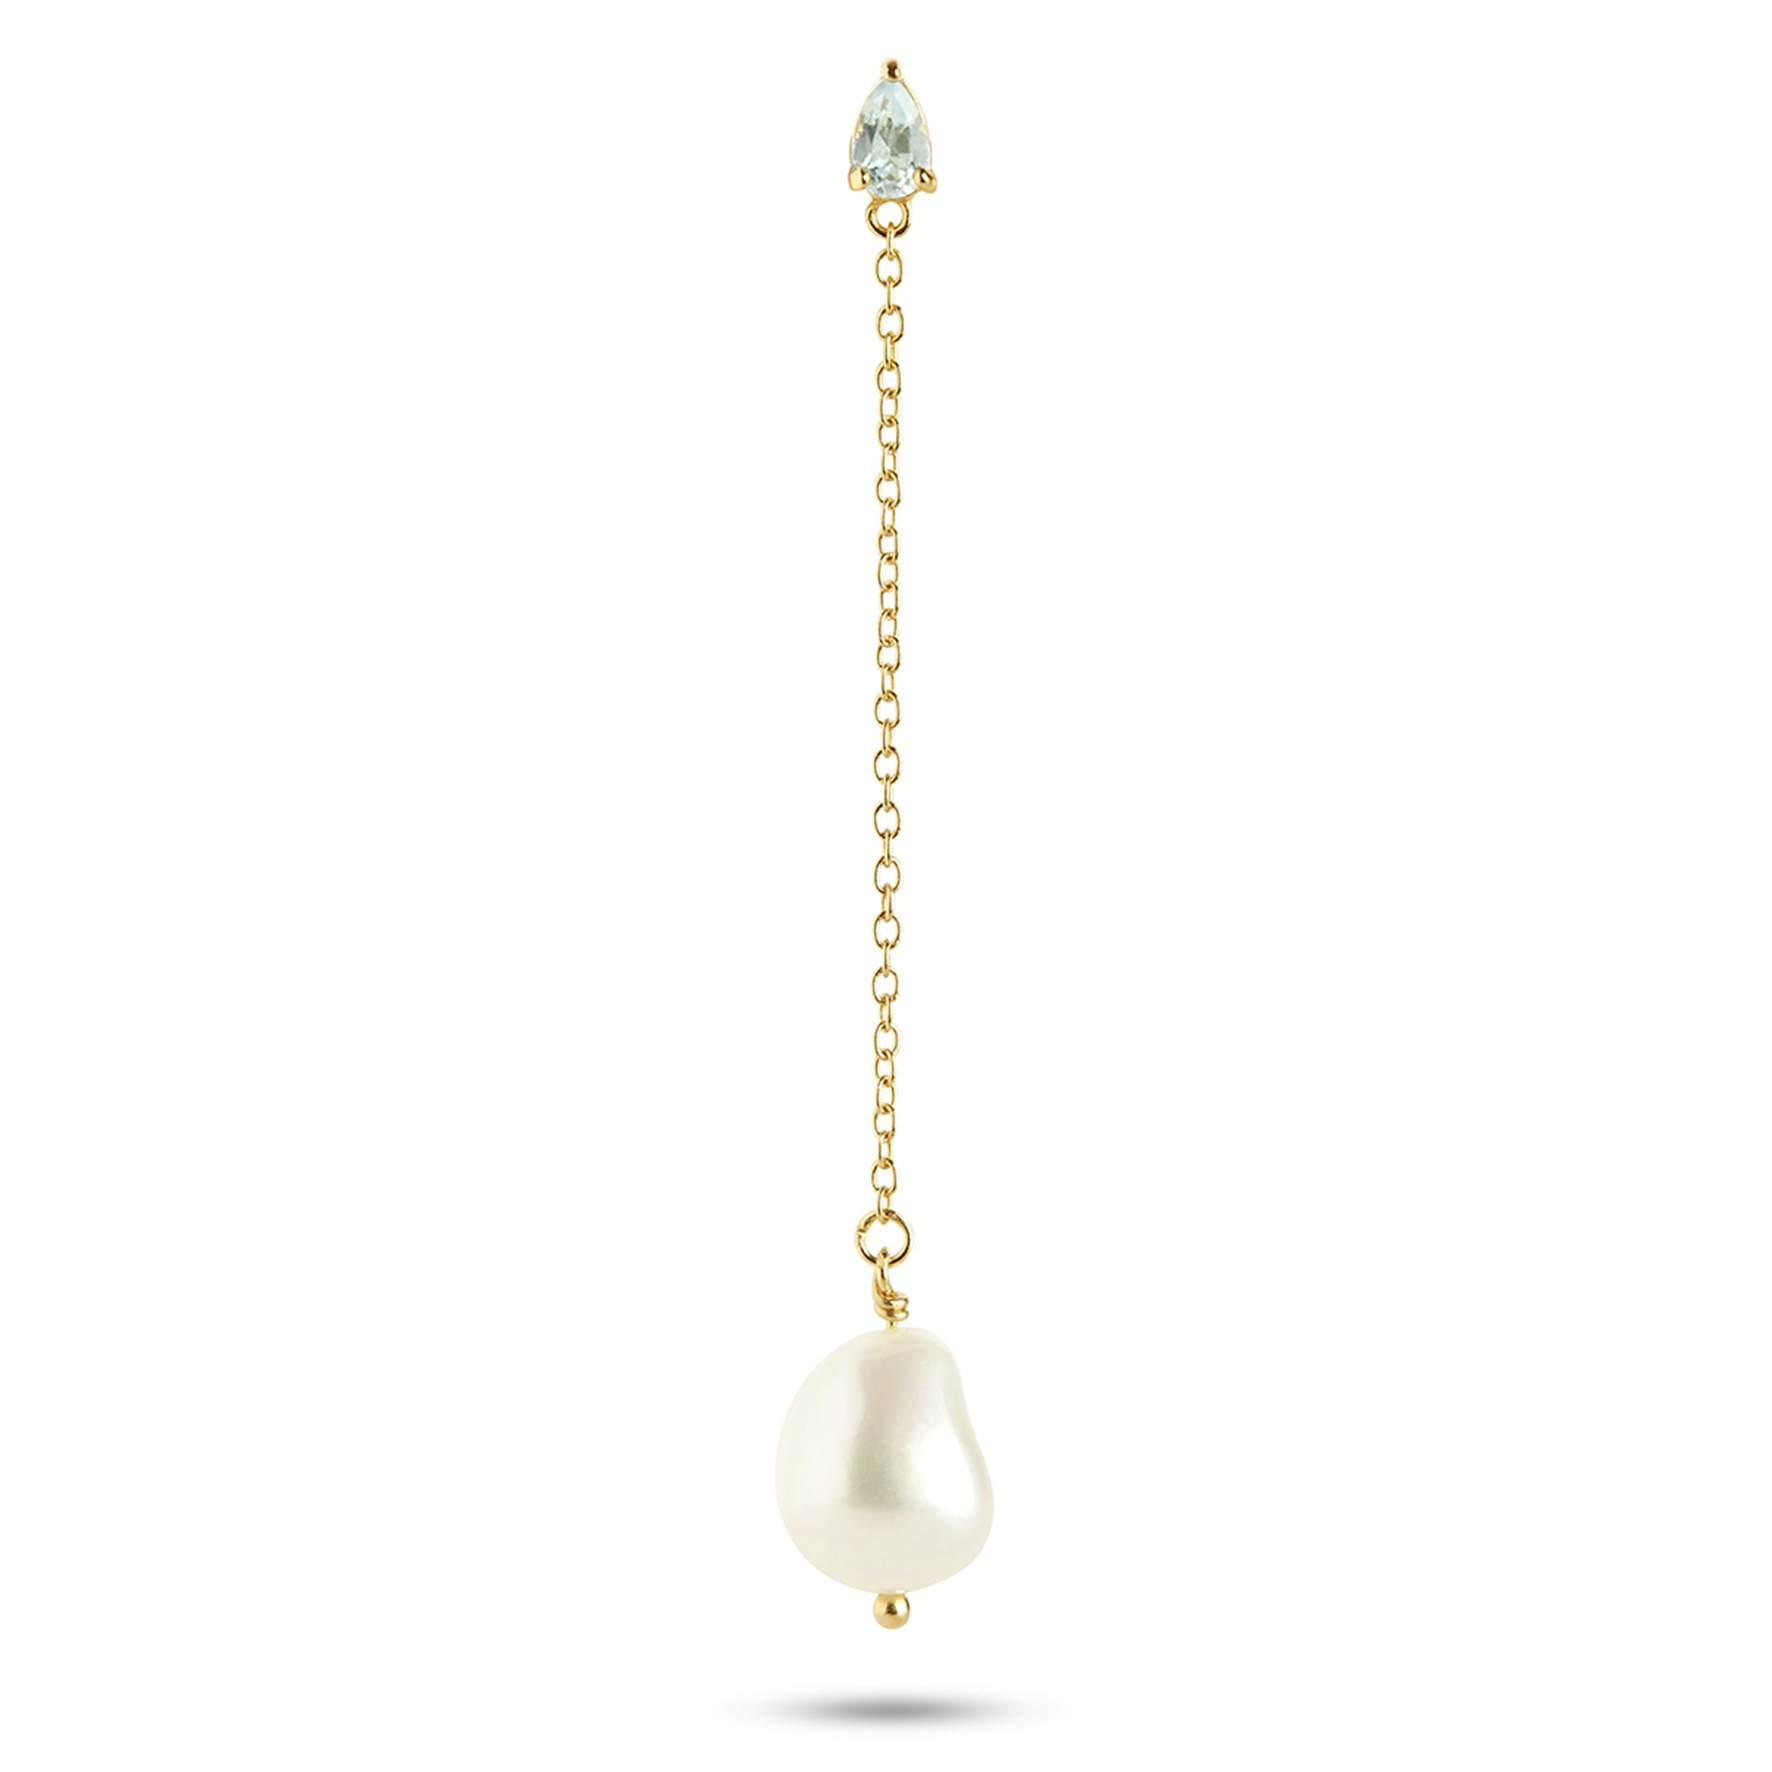 Gem Candy Long Chain Earring Aqua von Carré in Vergoldet-Silber Sterling 925|, Freshwater Pearl